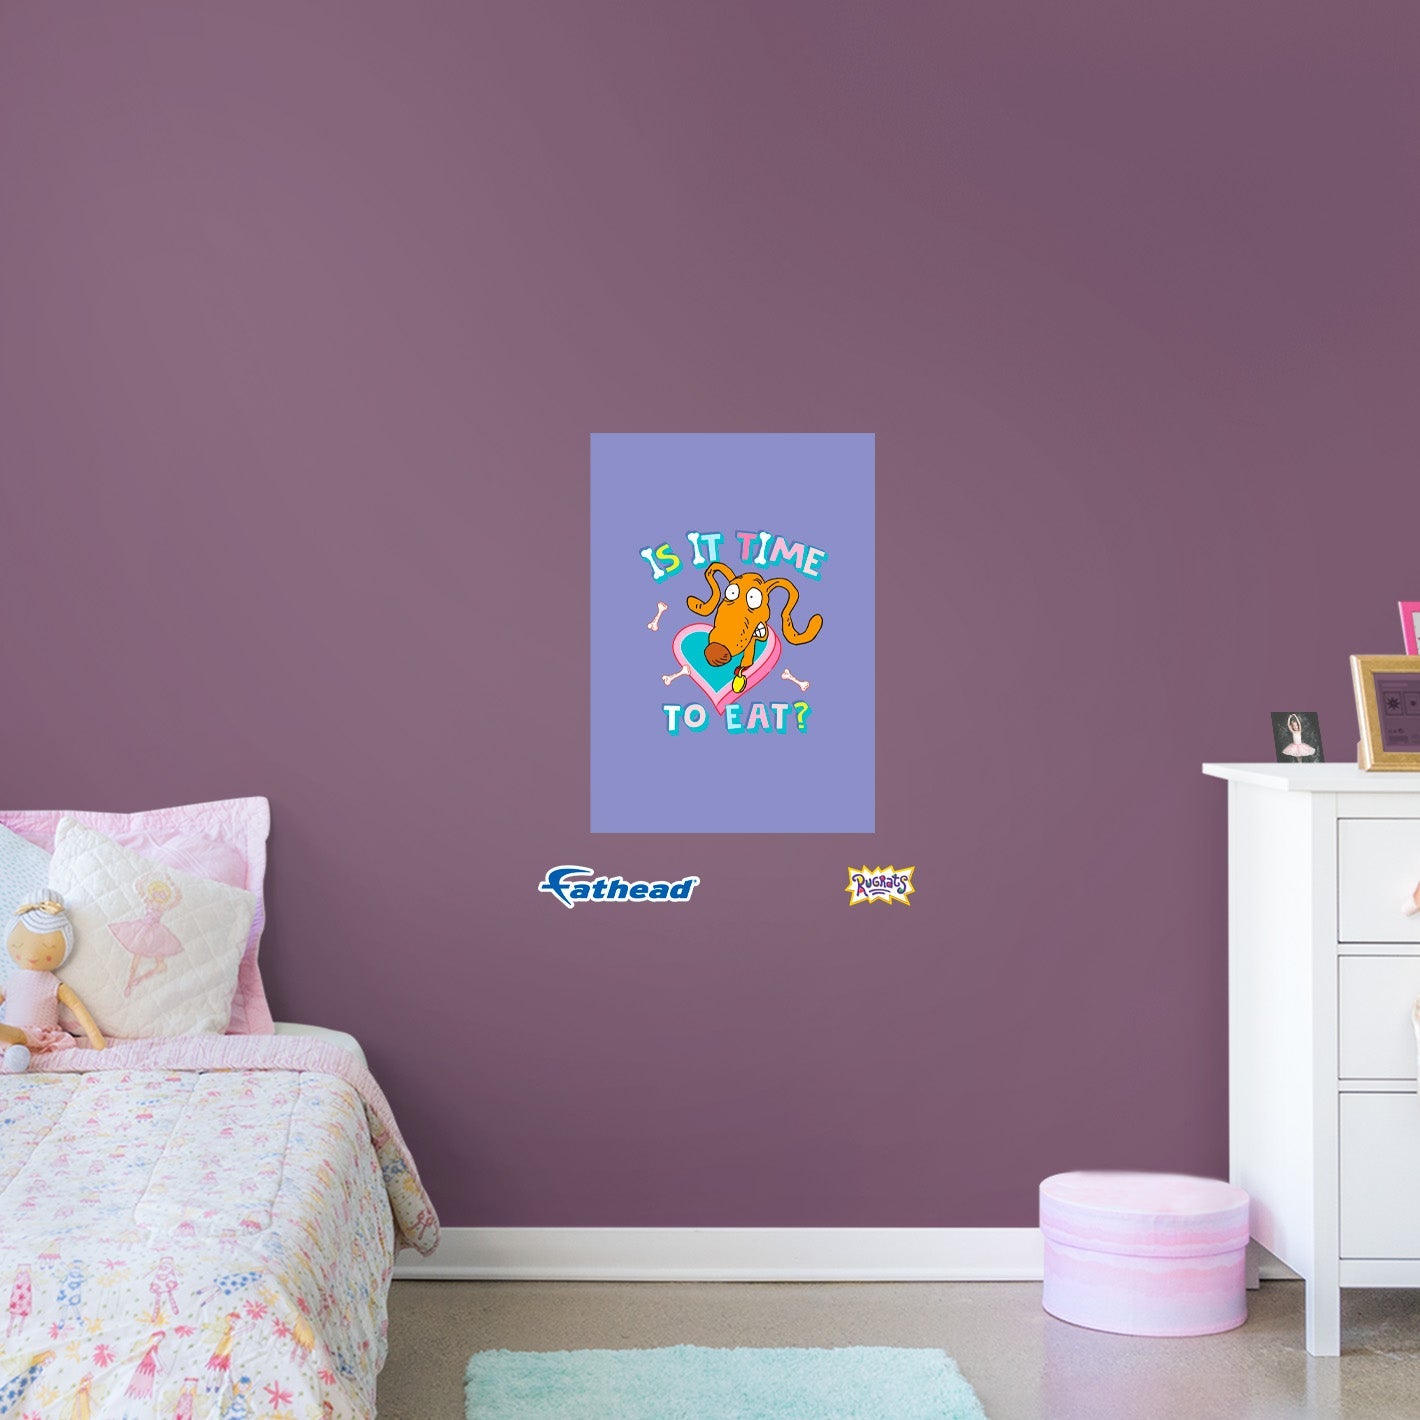 Rugrats: Is It Time To Eat Poster - Officially Licensed Nickelodeon Removable Adhesive Decal